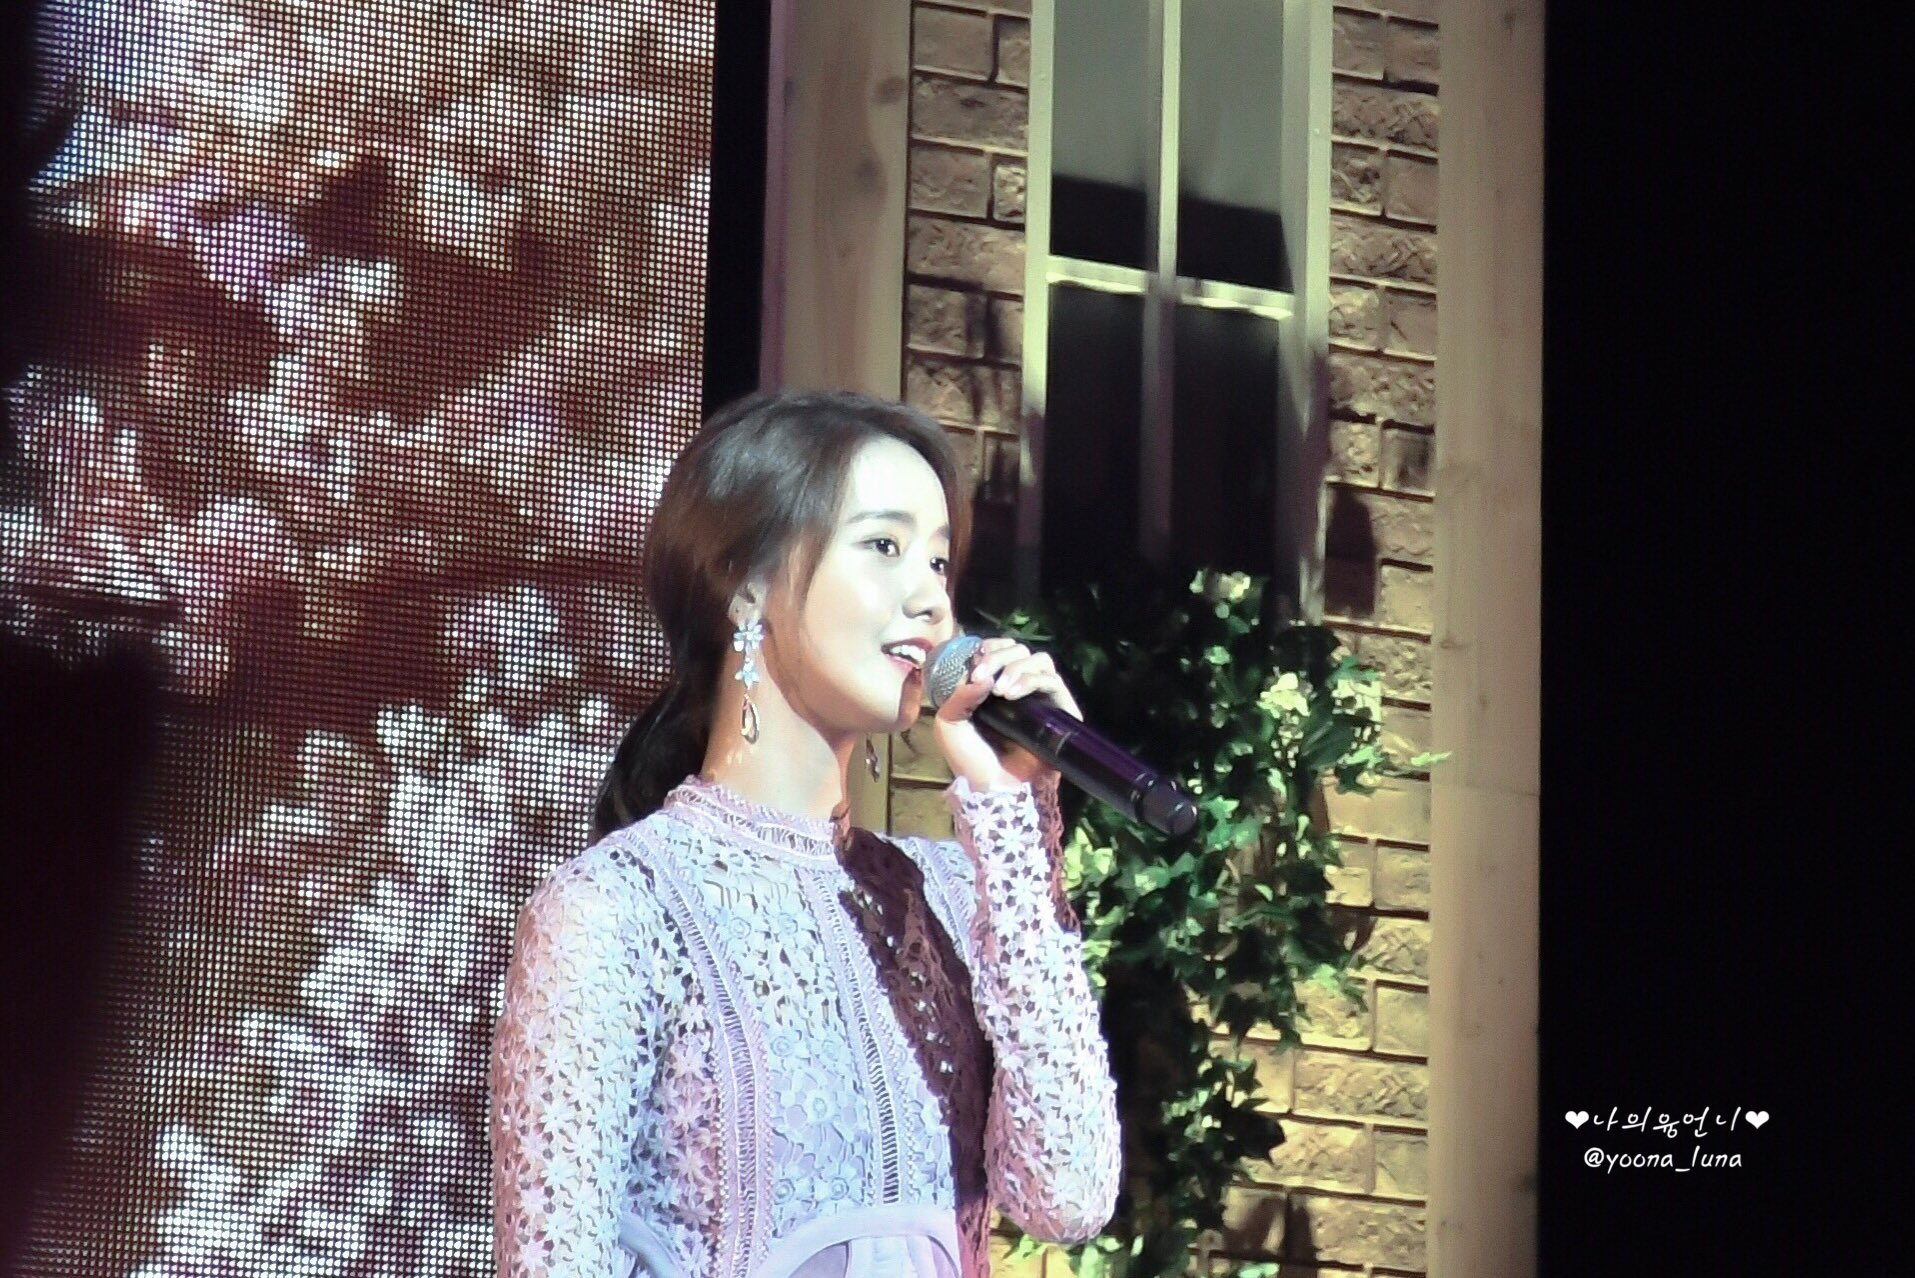 180713 YOONA FANMEETING TOUR, So Wonderful Day #Story_1 in TOKYO 윤아 by yoona_lun (4).jpg